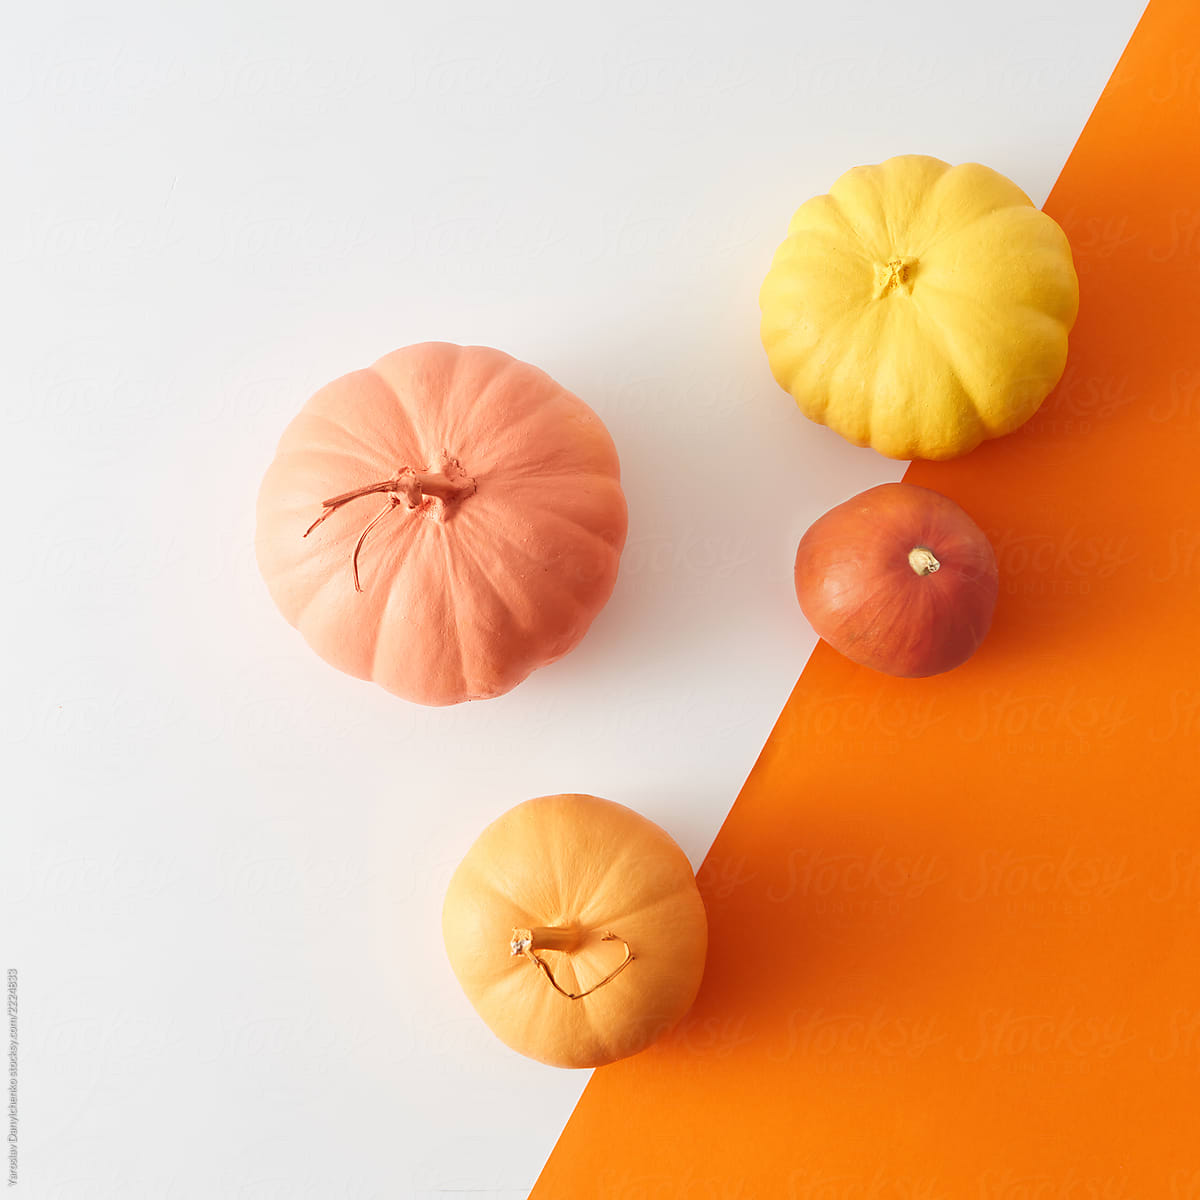 Creative autumn pattern with colorful painted pumpkin on a duotone white orange background with copy space. Flat lay. Greeting card